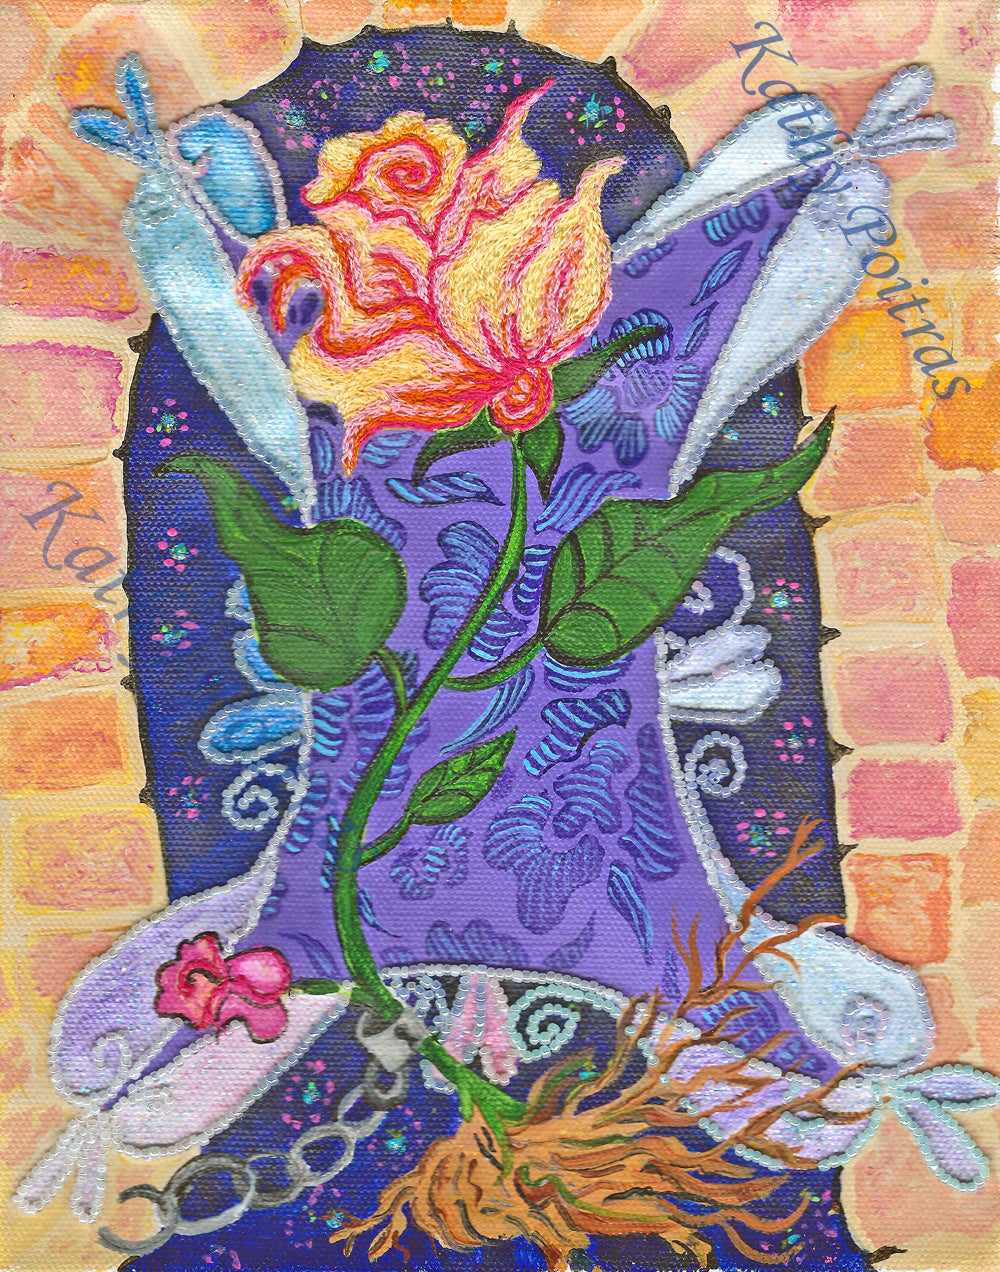 A rose breaks free from it's chains. 8x10 inch hand embroidered rose blossom as part of an acrylic painting. There is also beadwork in the painting.